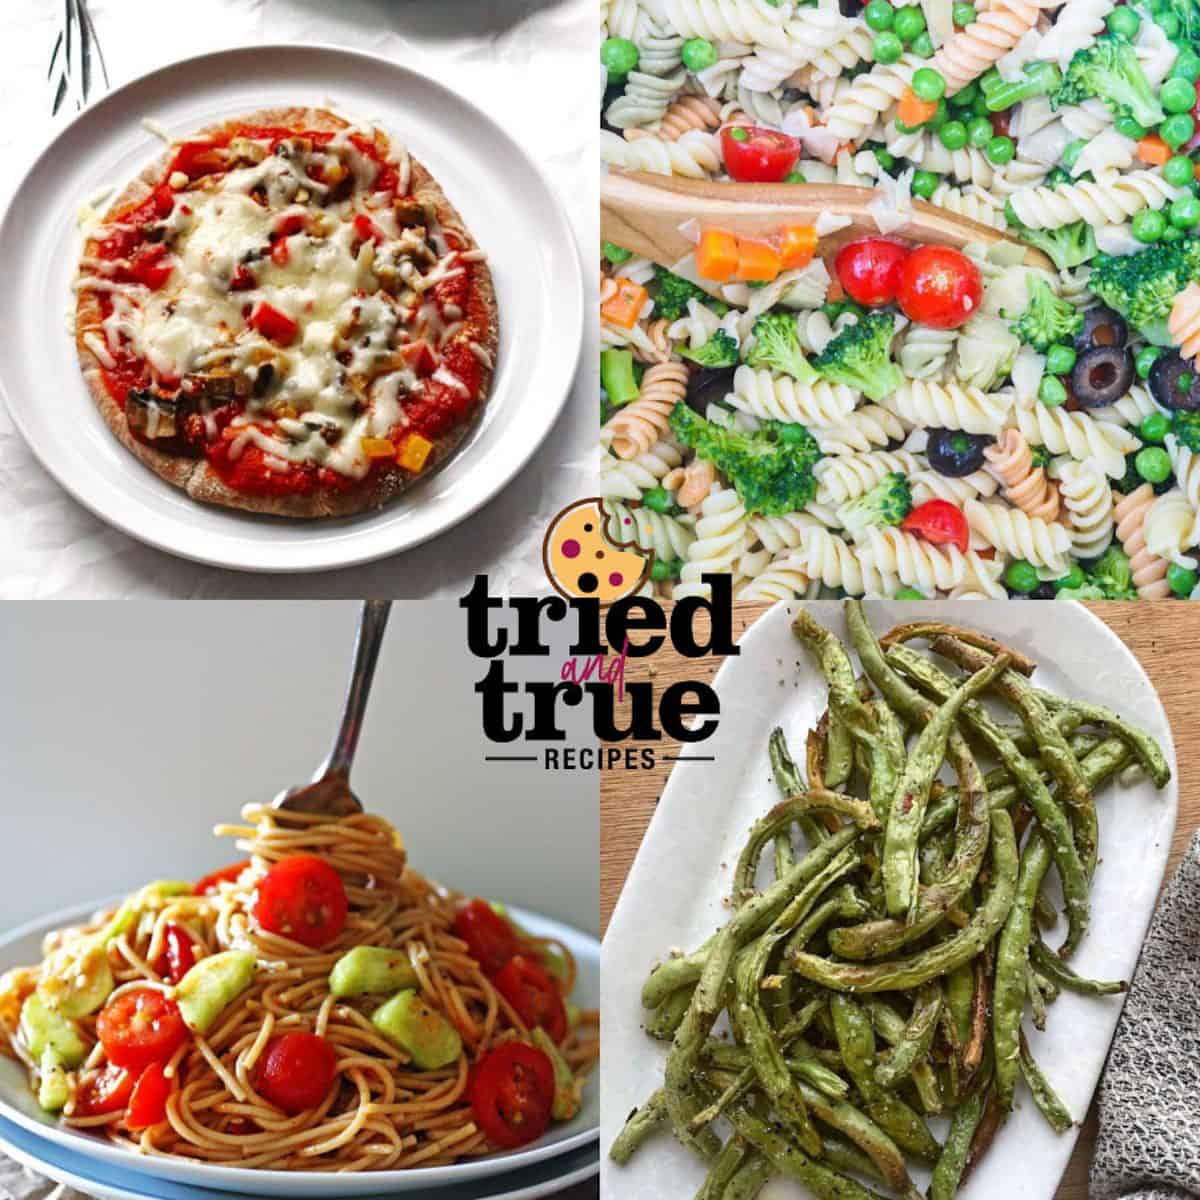 A collage of images showing healthy side dishes for pizza from pasta salad to air fried green beans, with a pita pizza.